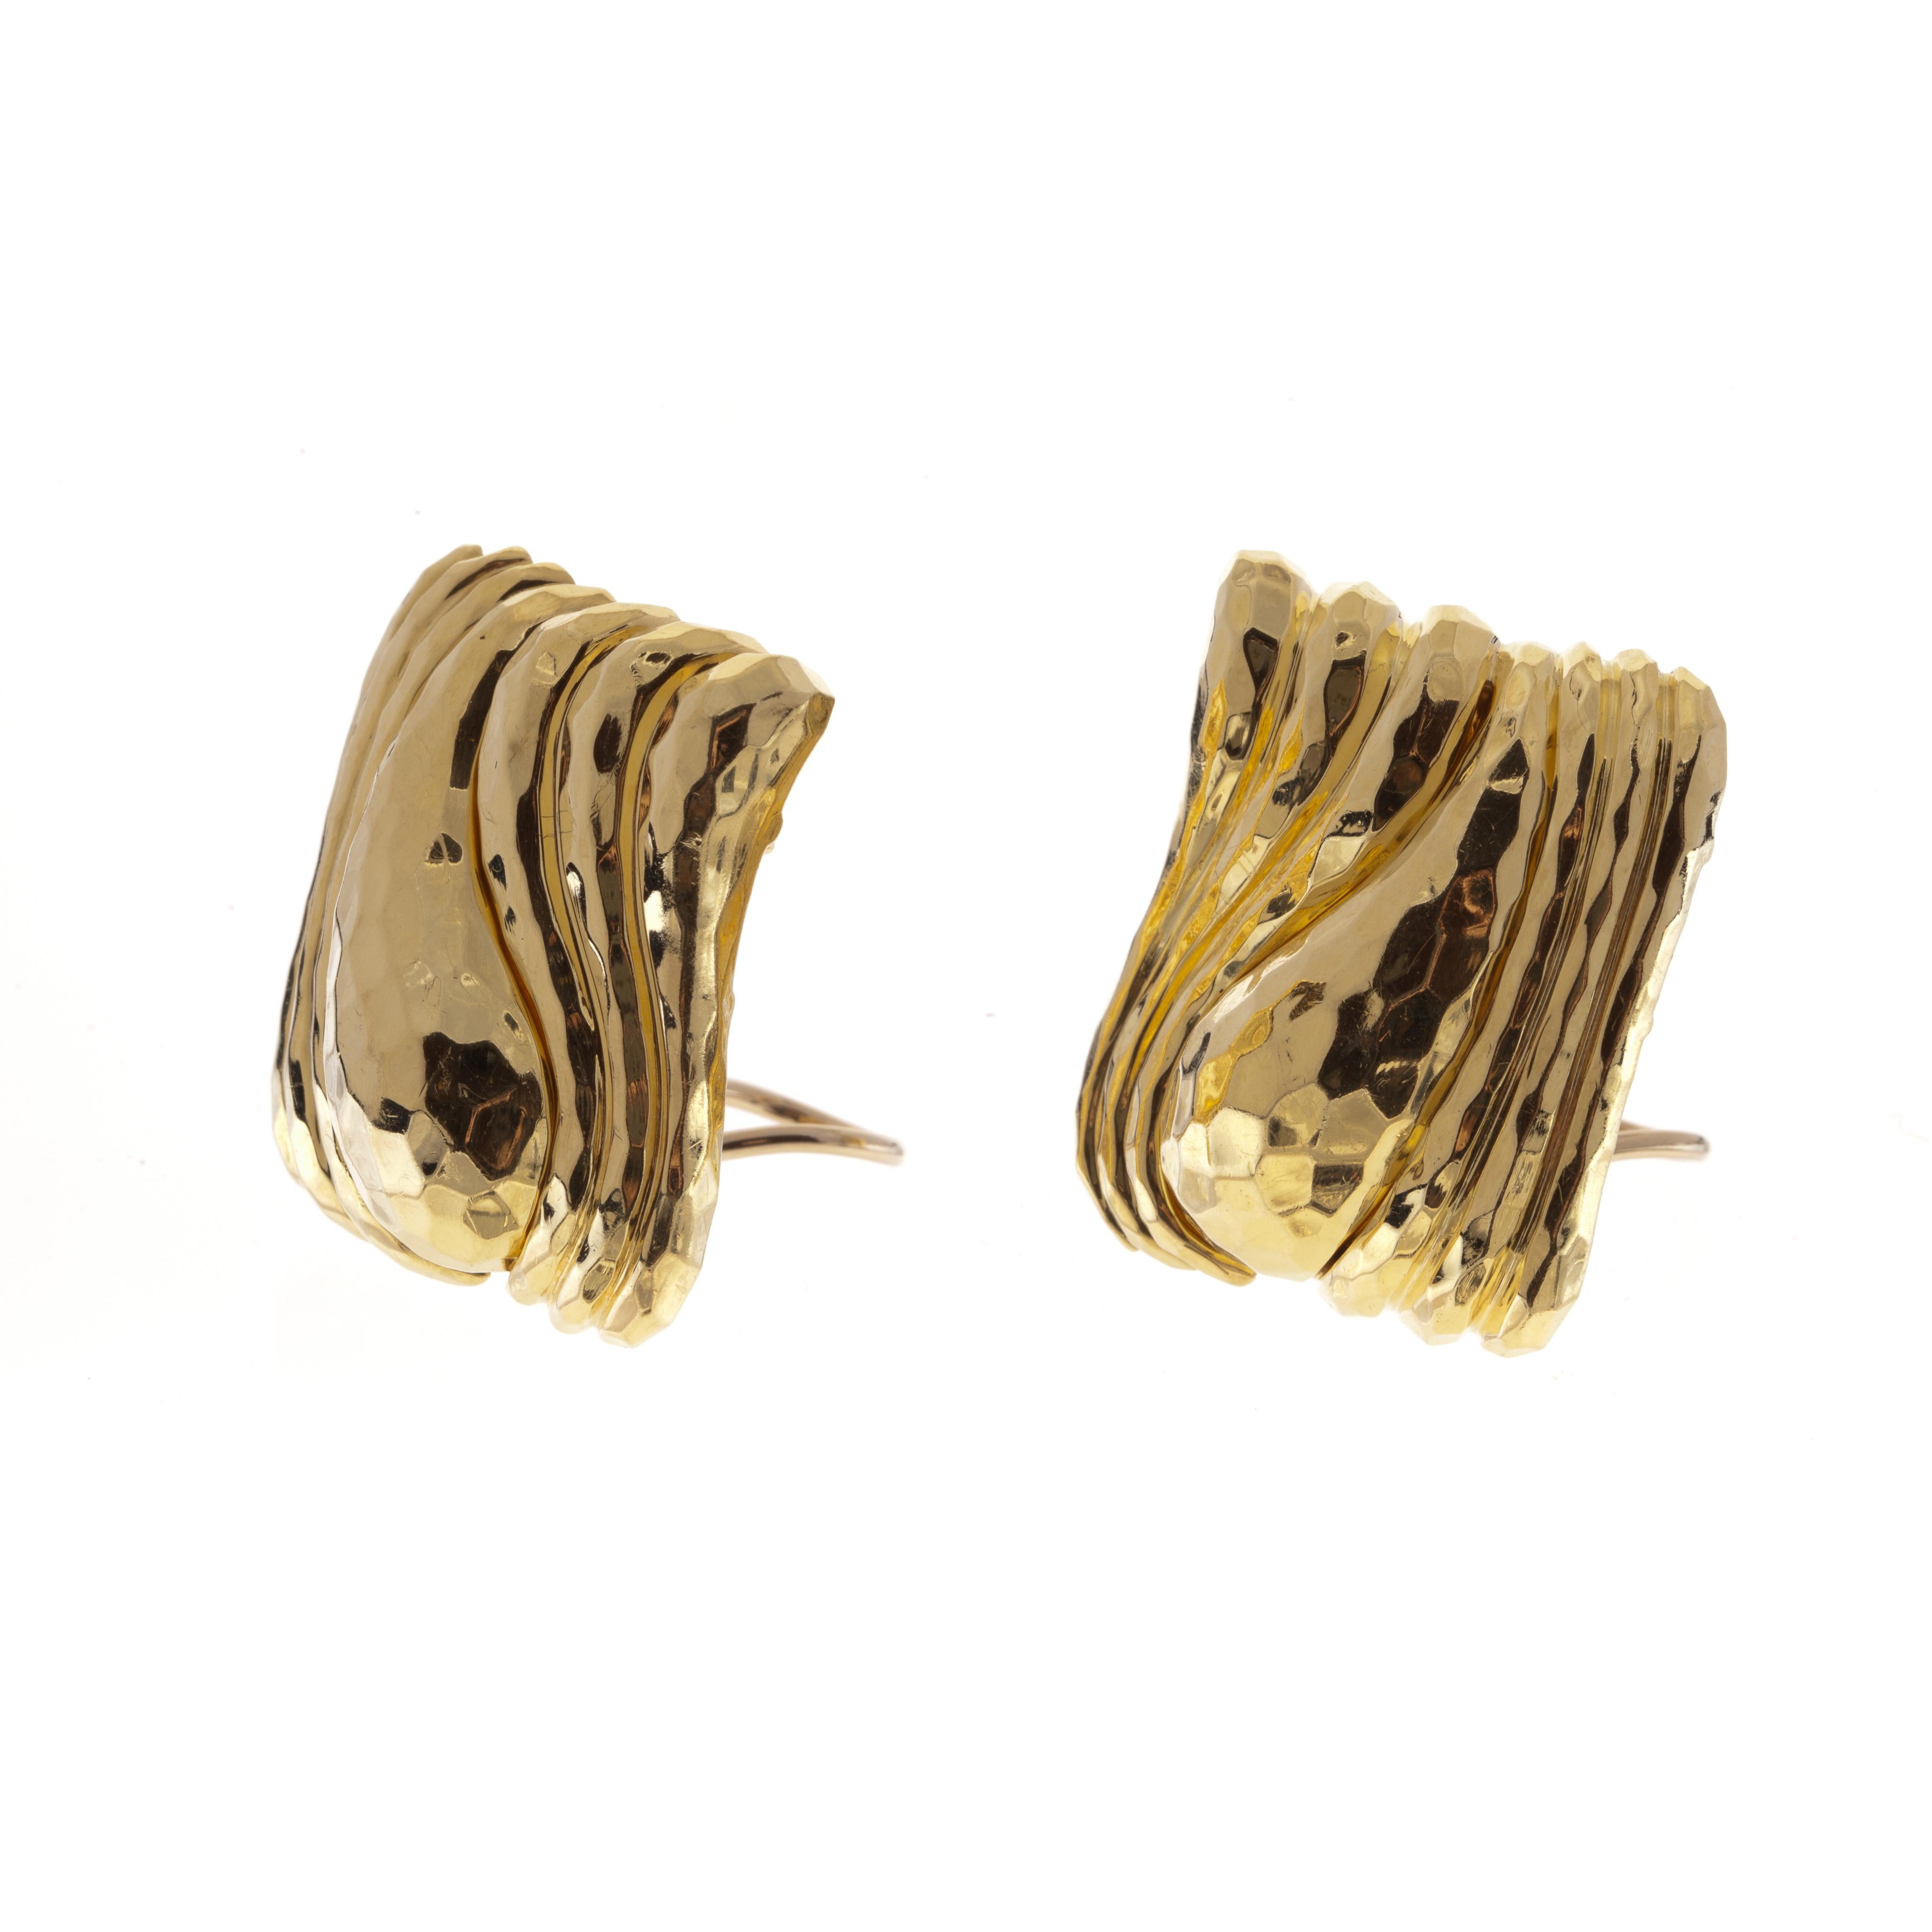 Earrings by Henry Dunay with a hammered finish.  They are very dimensional  with the paisley being raised.  Measure 1-3/16